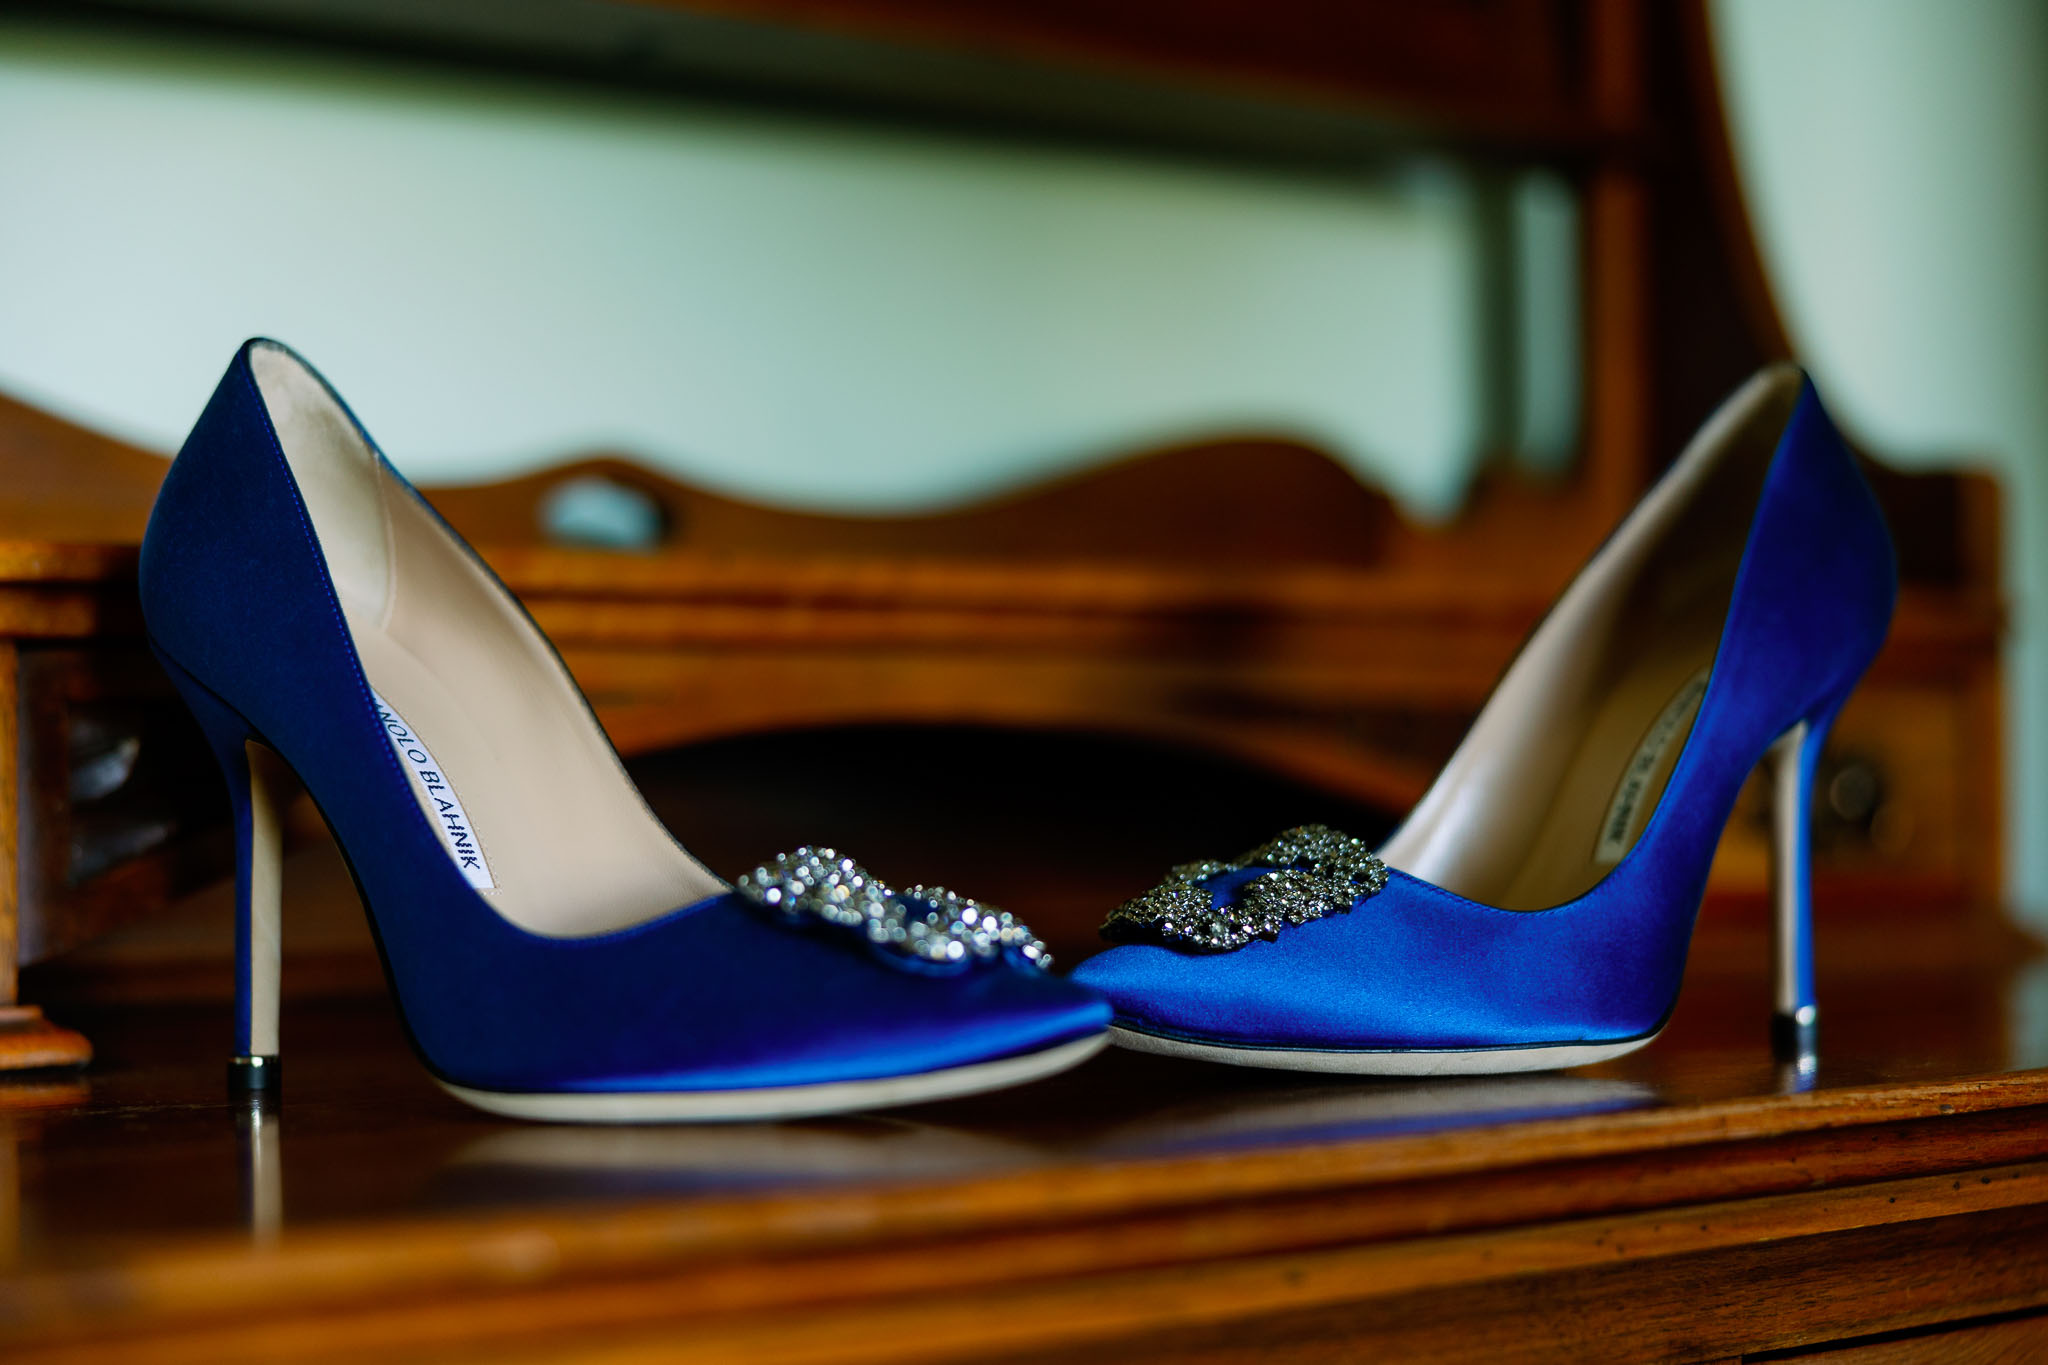 Manolo blue shoes at a wedding